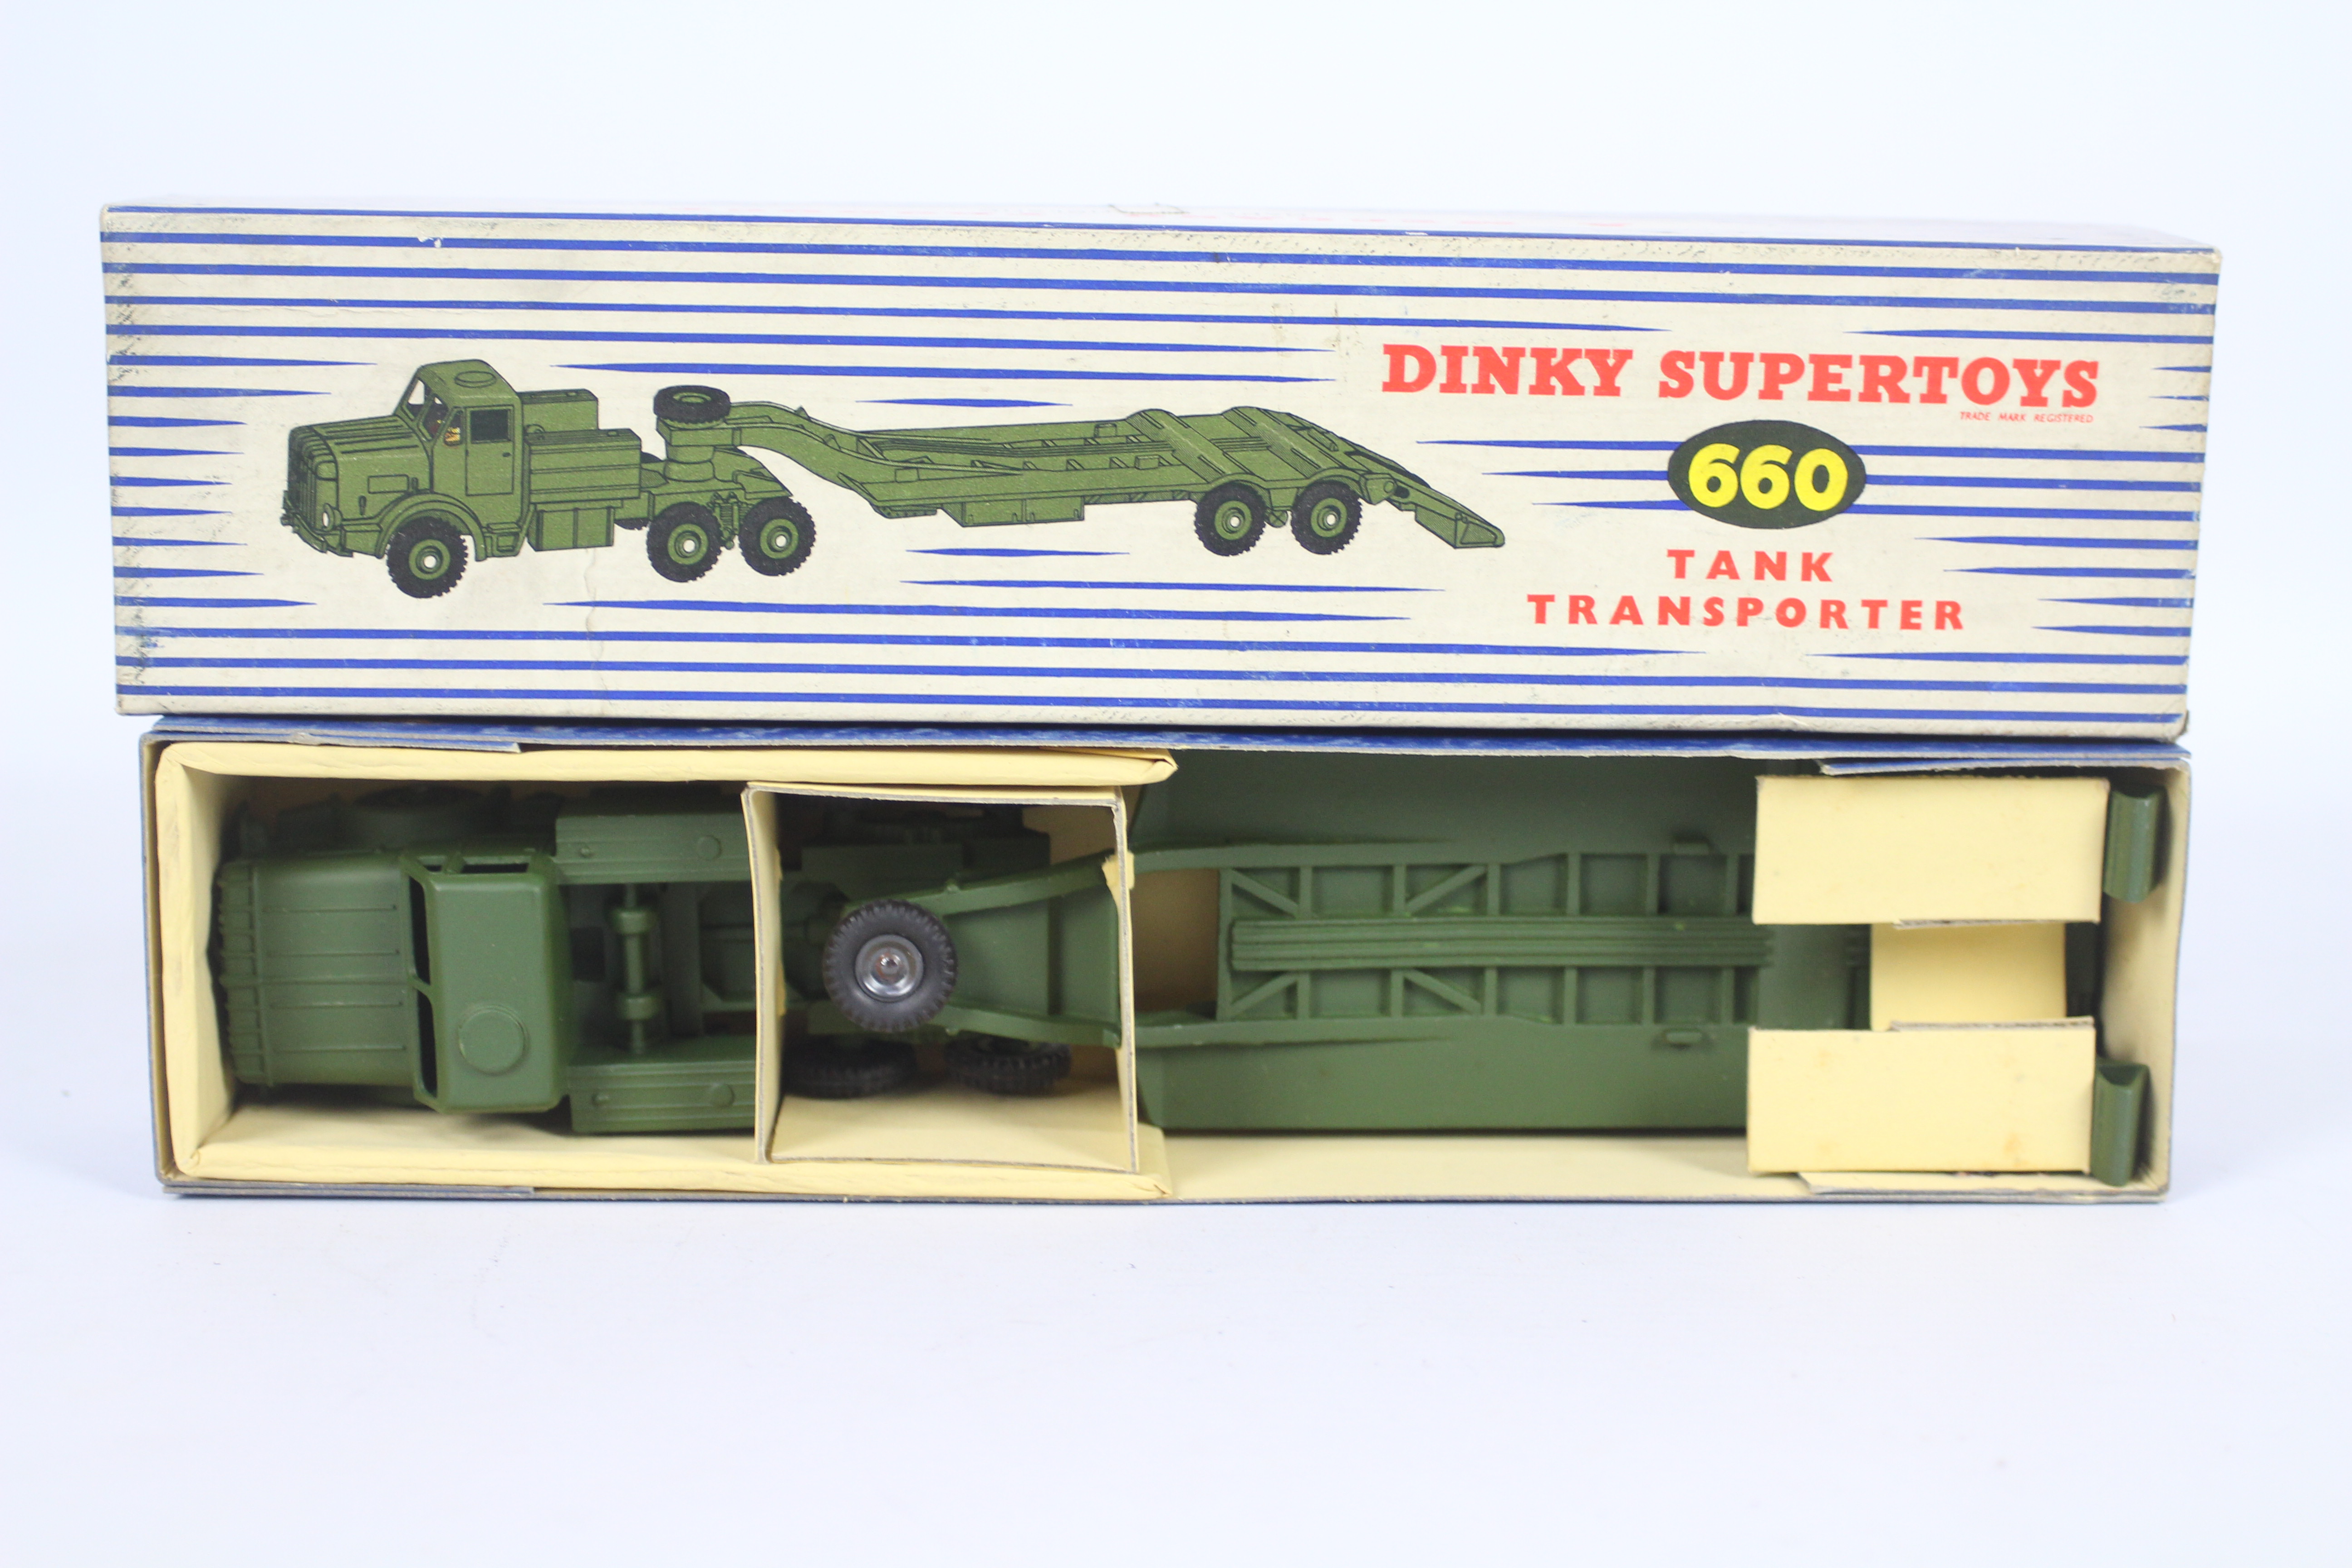 Dinky - A boxed Dinky # 660 Mighty Antar Tank Transporter. - Image 6 of 6